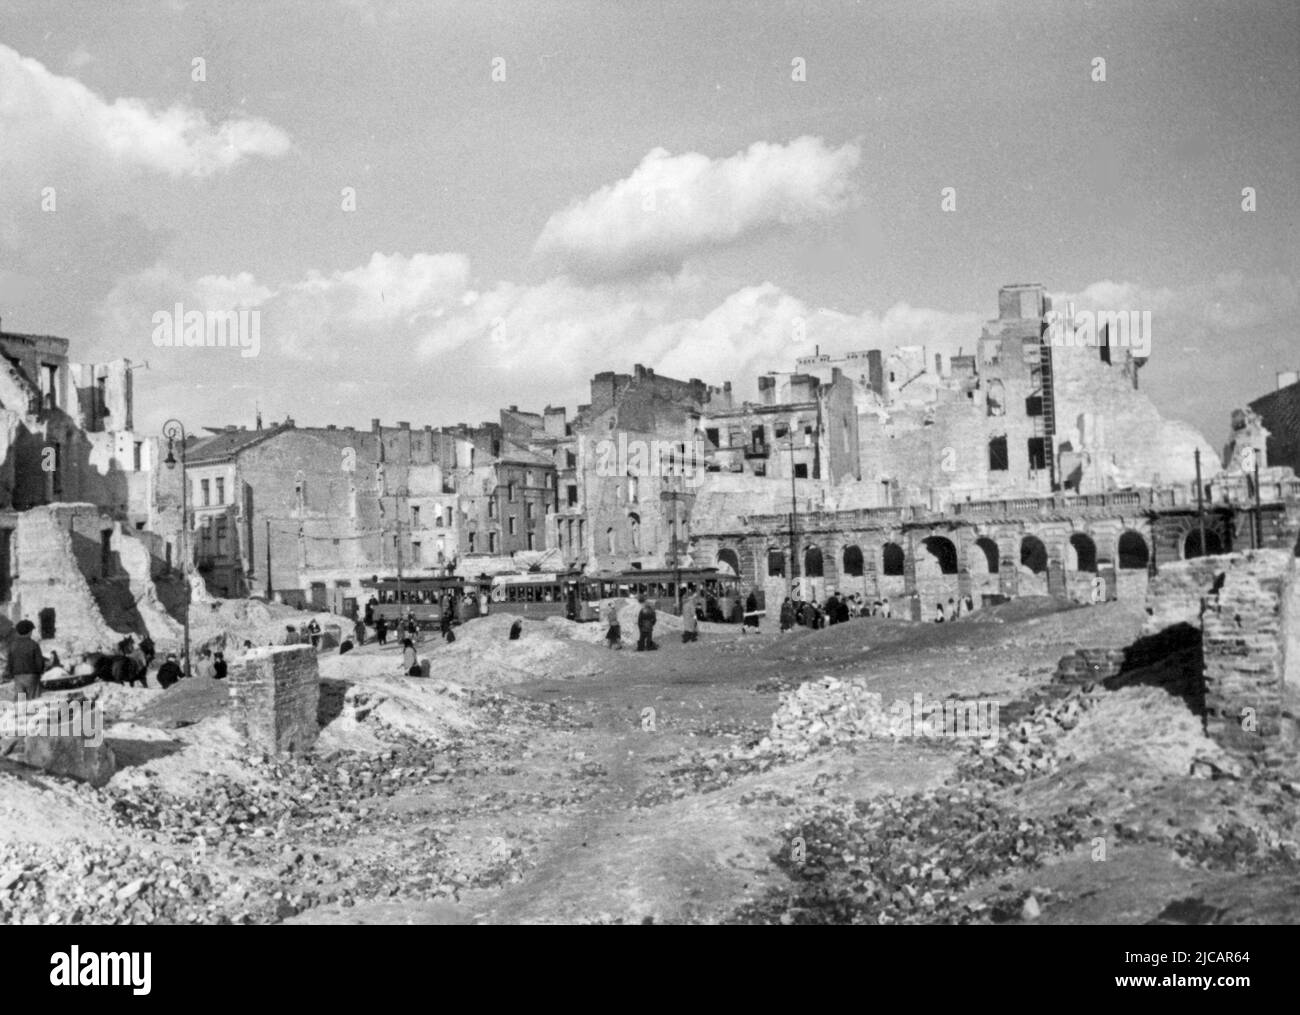 The ruins of Warsaw. Warsaw was heavily damaged in 1939. In 1944 the famous Warsaw Uprising was a major and serious attempt to fight the nazi occupiers. The German response was uncompromising and violent and once the Polish Home Army had been defeated the city was systematically destroyed. Stock Photo